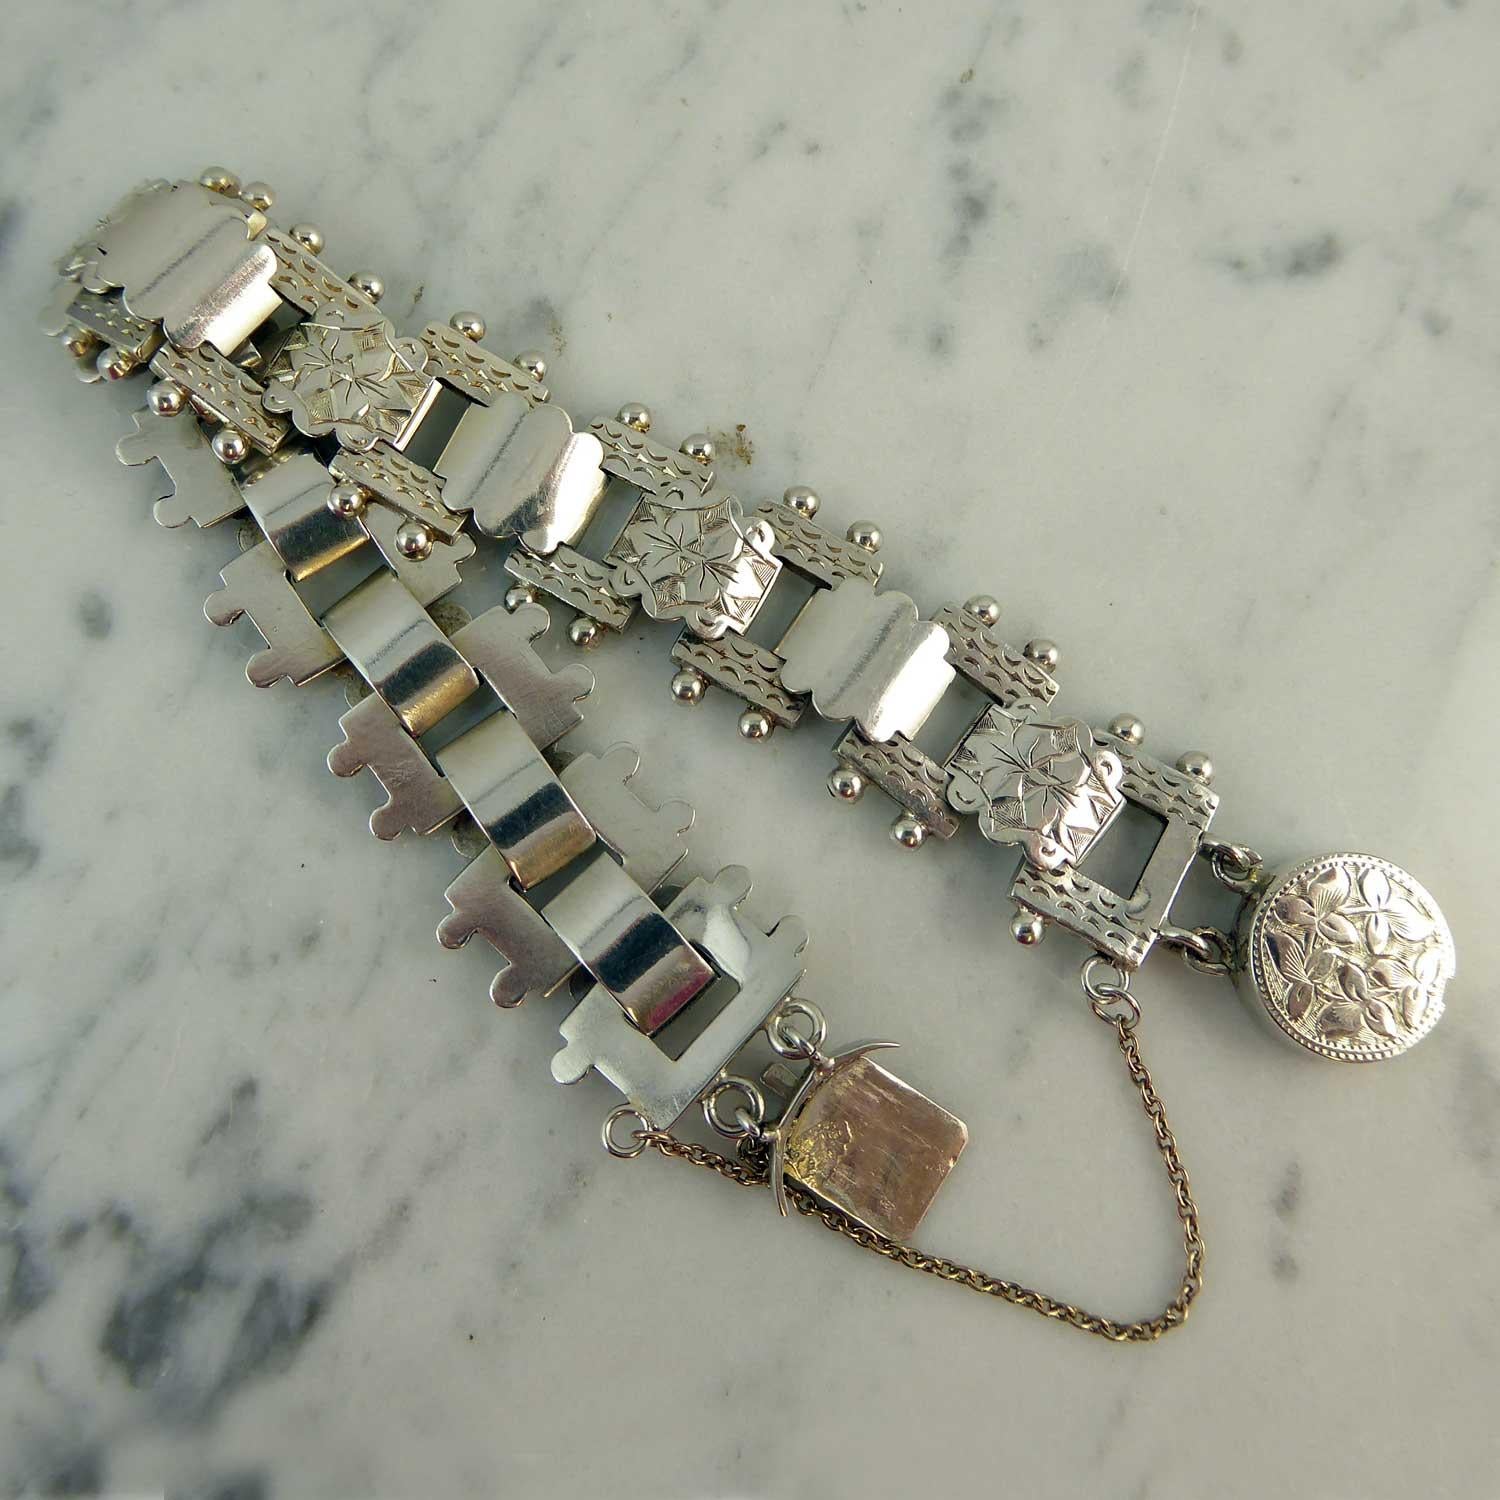 Victorian silver bracelet dating from circa 1899.  The bracelet comprises 13 rectangular silver links with a hand etched pattern and silver bead decoration.  These links are connected by bevelled links with a scalloped edge and alternate between